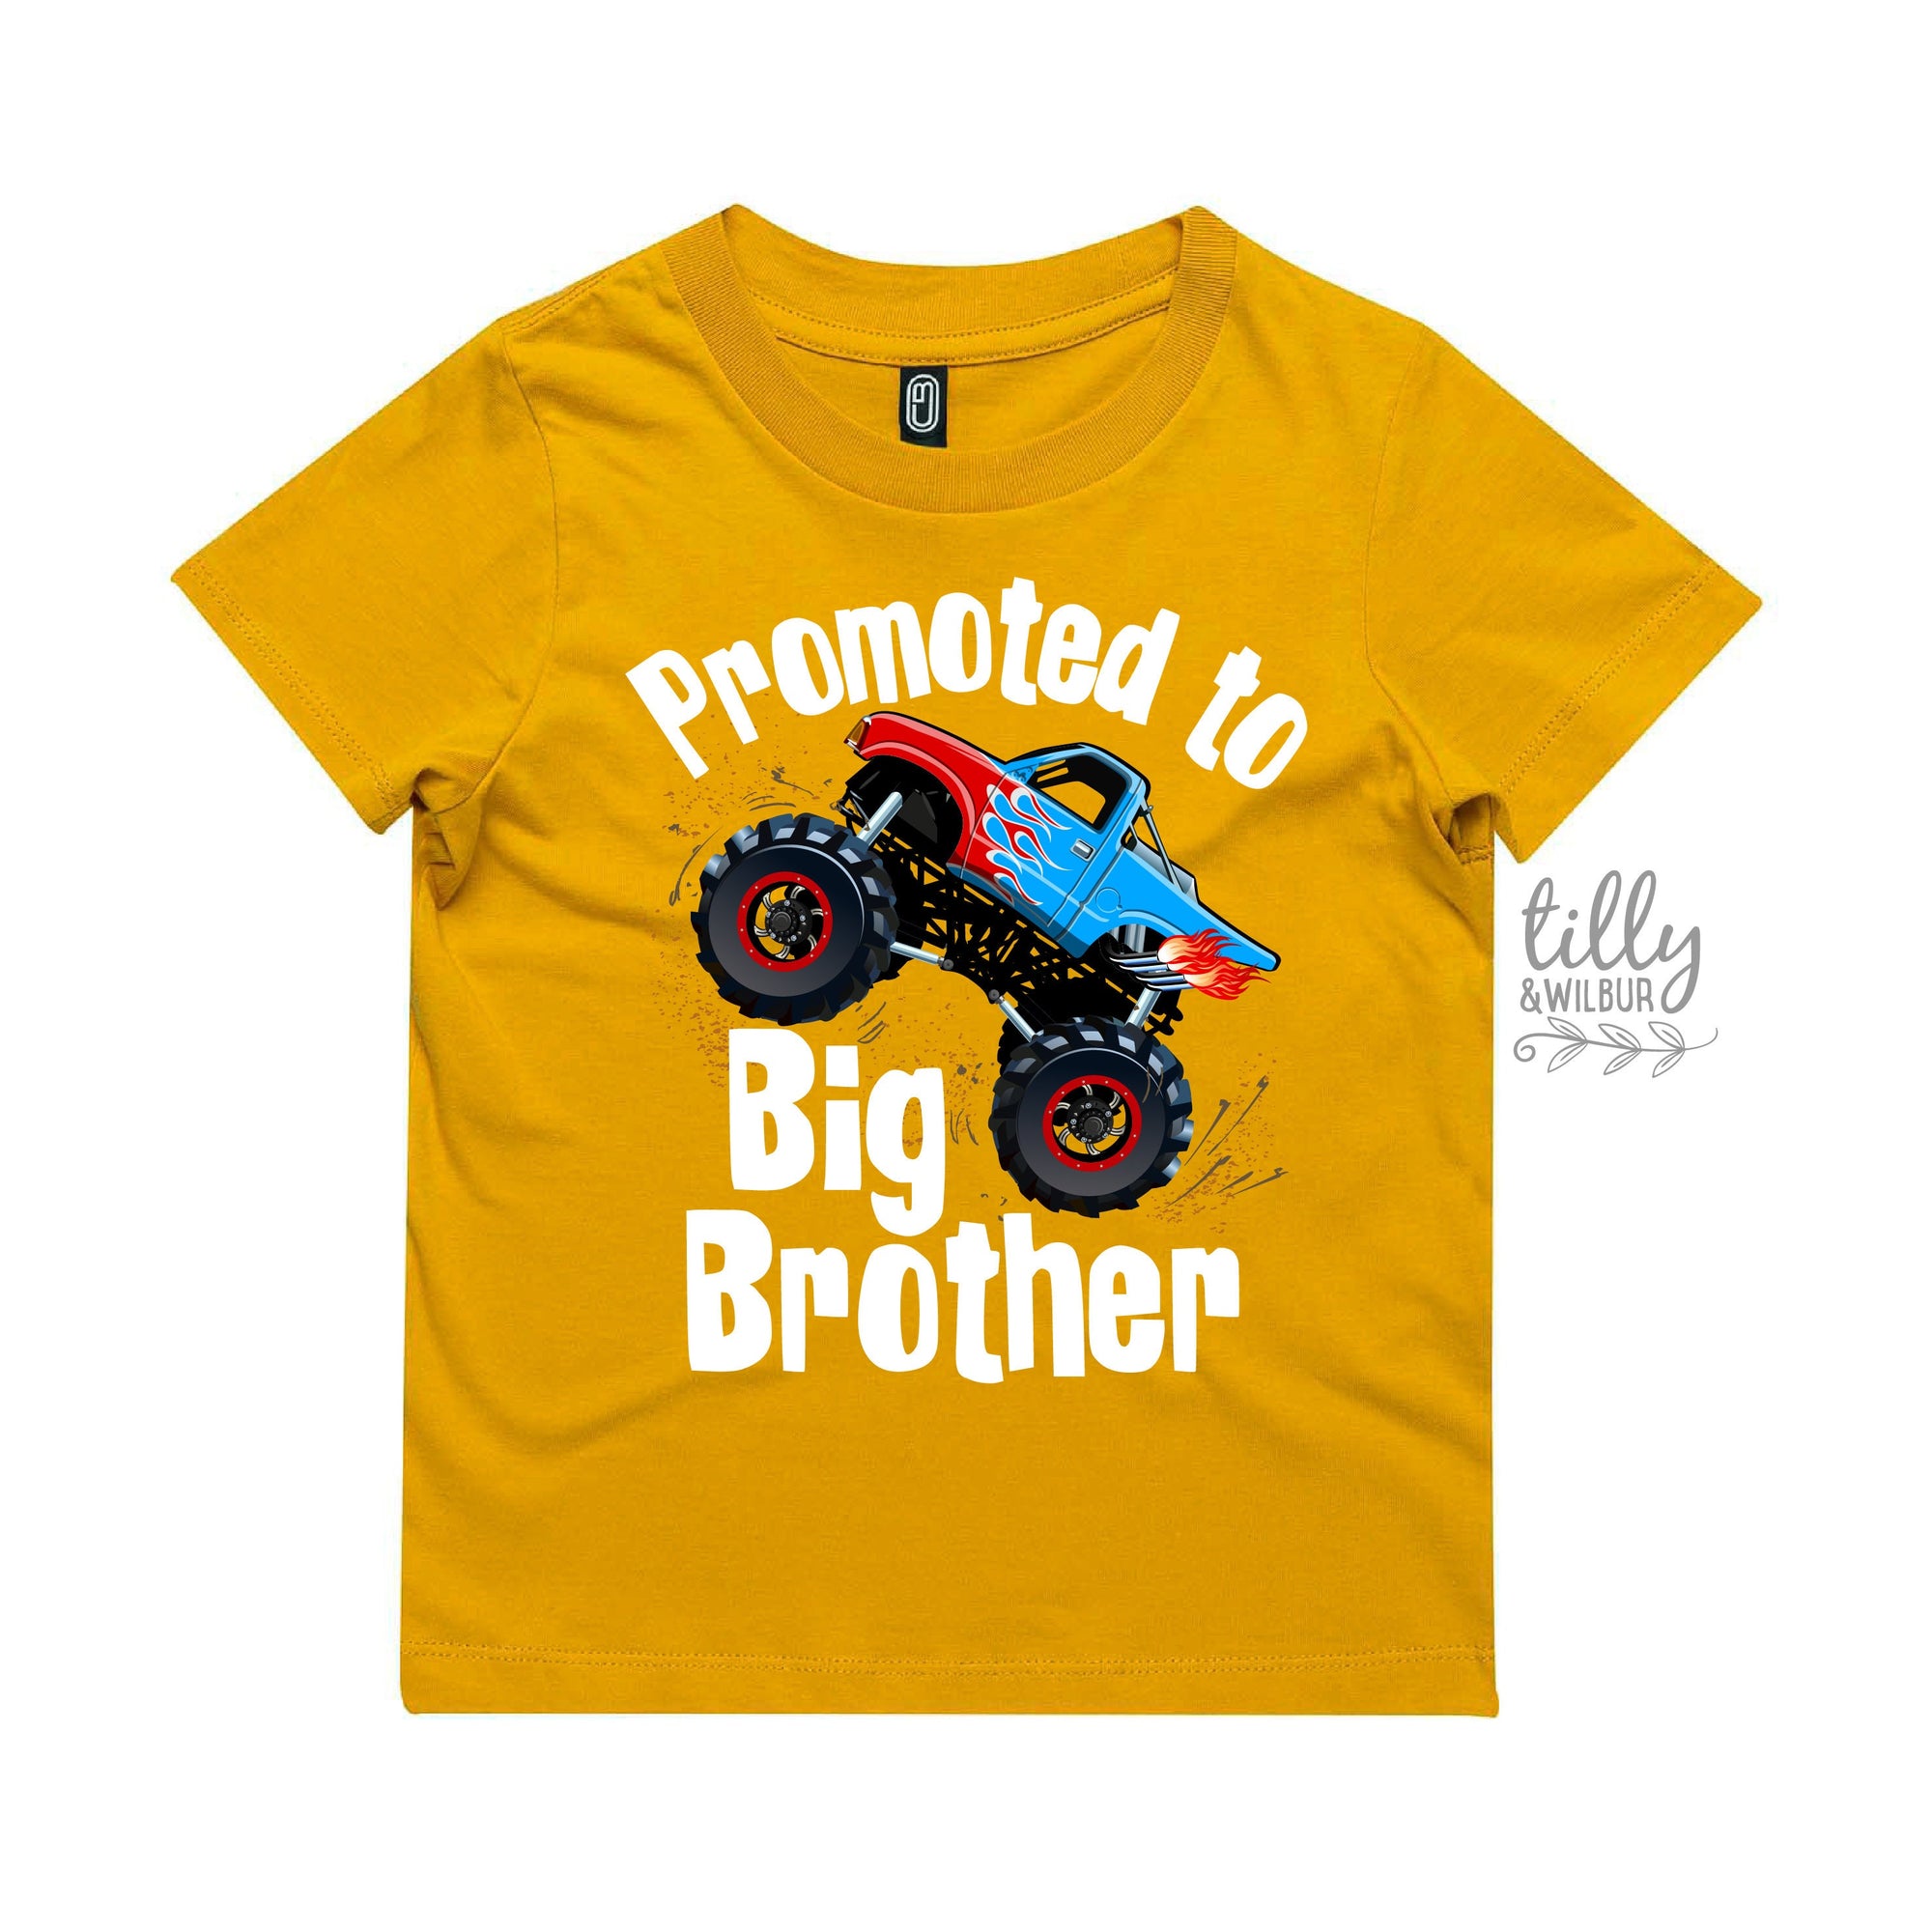 Big Brother T-Shirt, Promoted To Big Brother, Big Bro T-Shirt, Pregnancy Announcement Tee, I'm Going To Be A Big Brother, Big Brother Gift